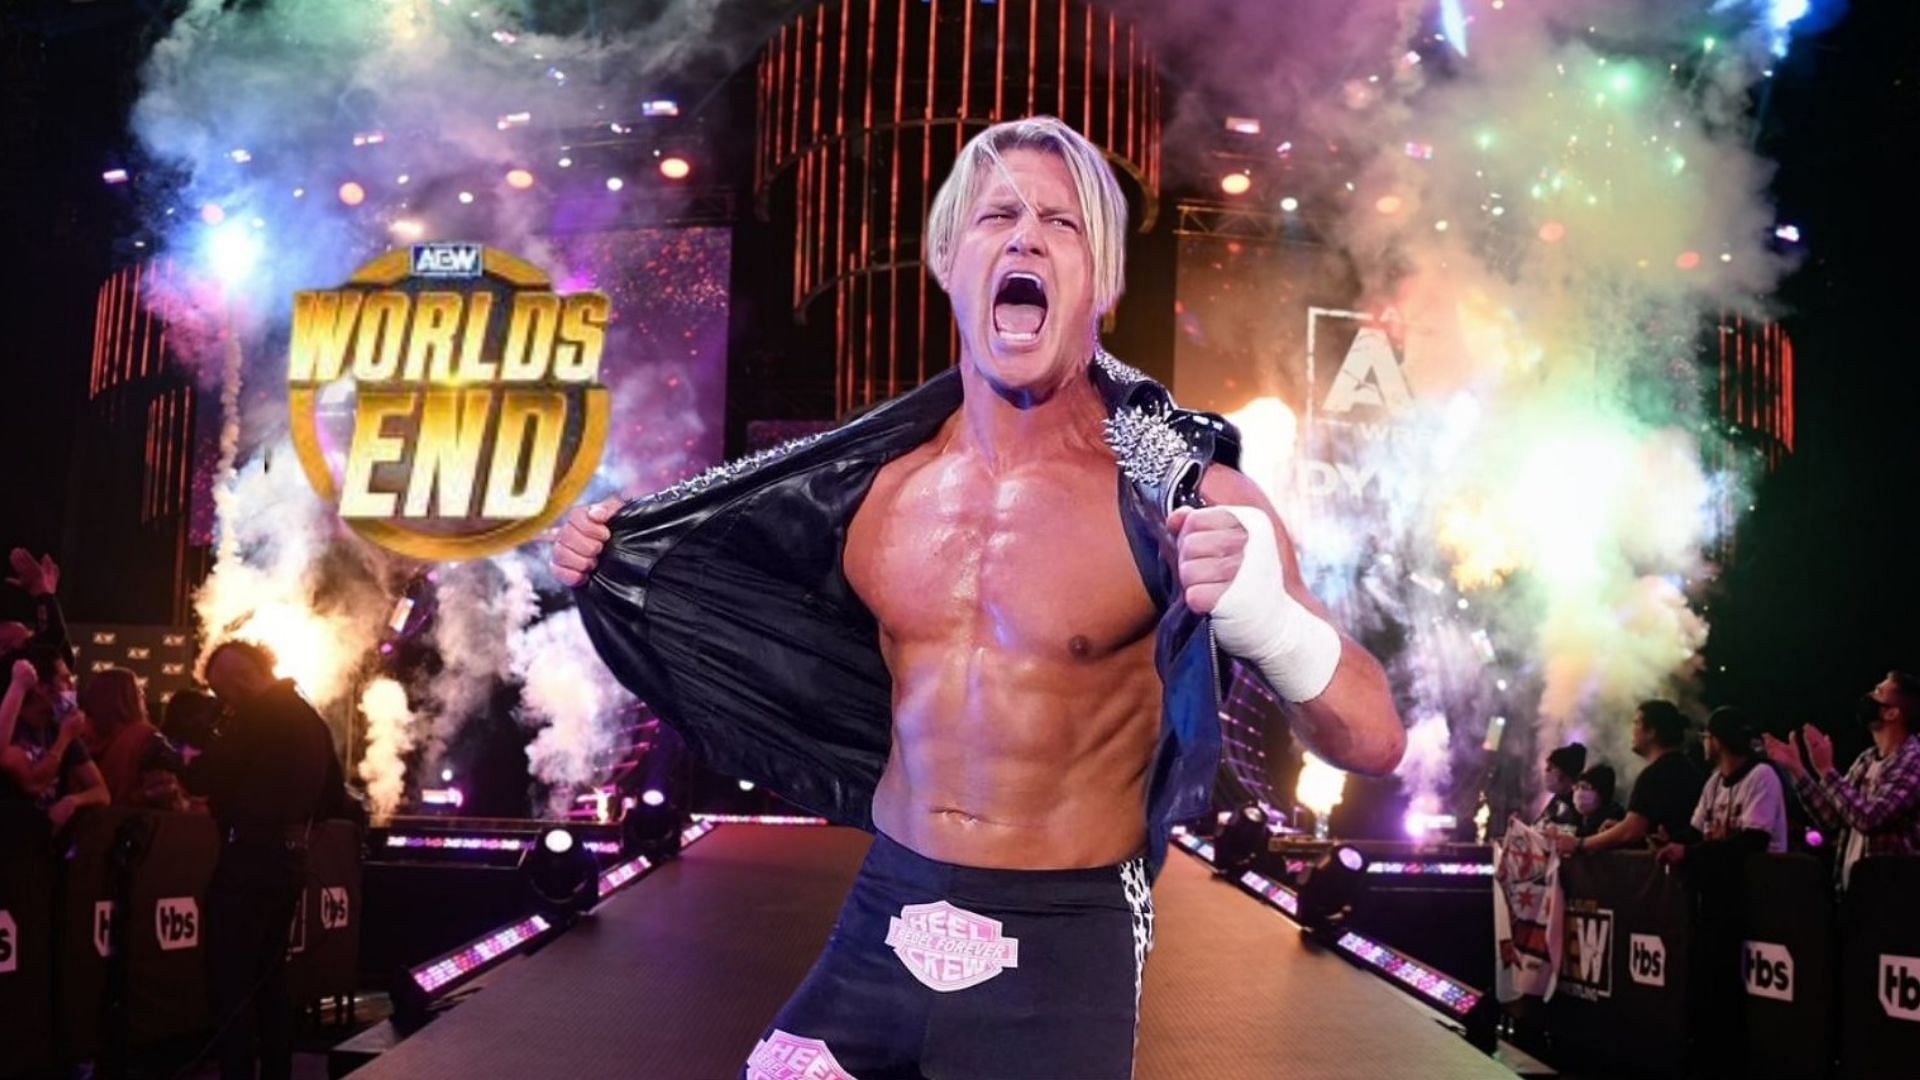 Could Dolph Ziggler appear at Worlds End?